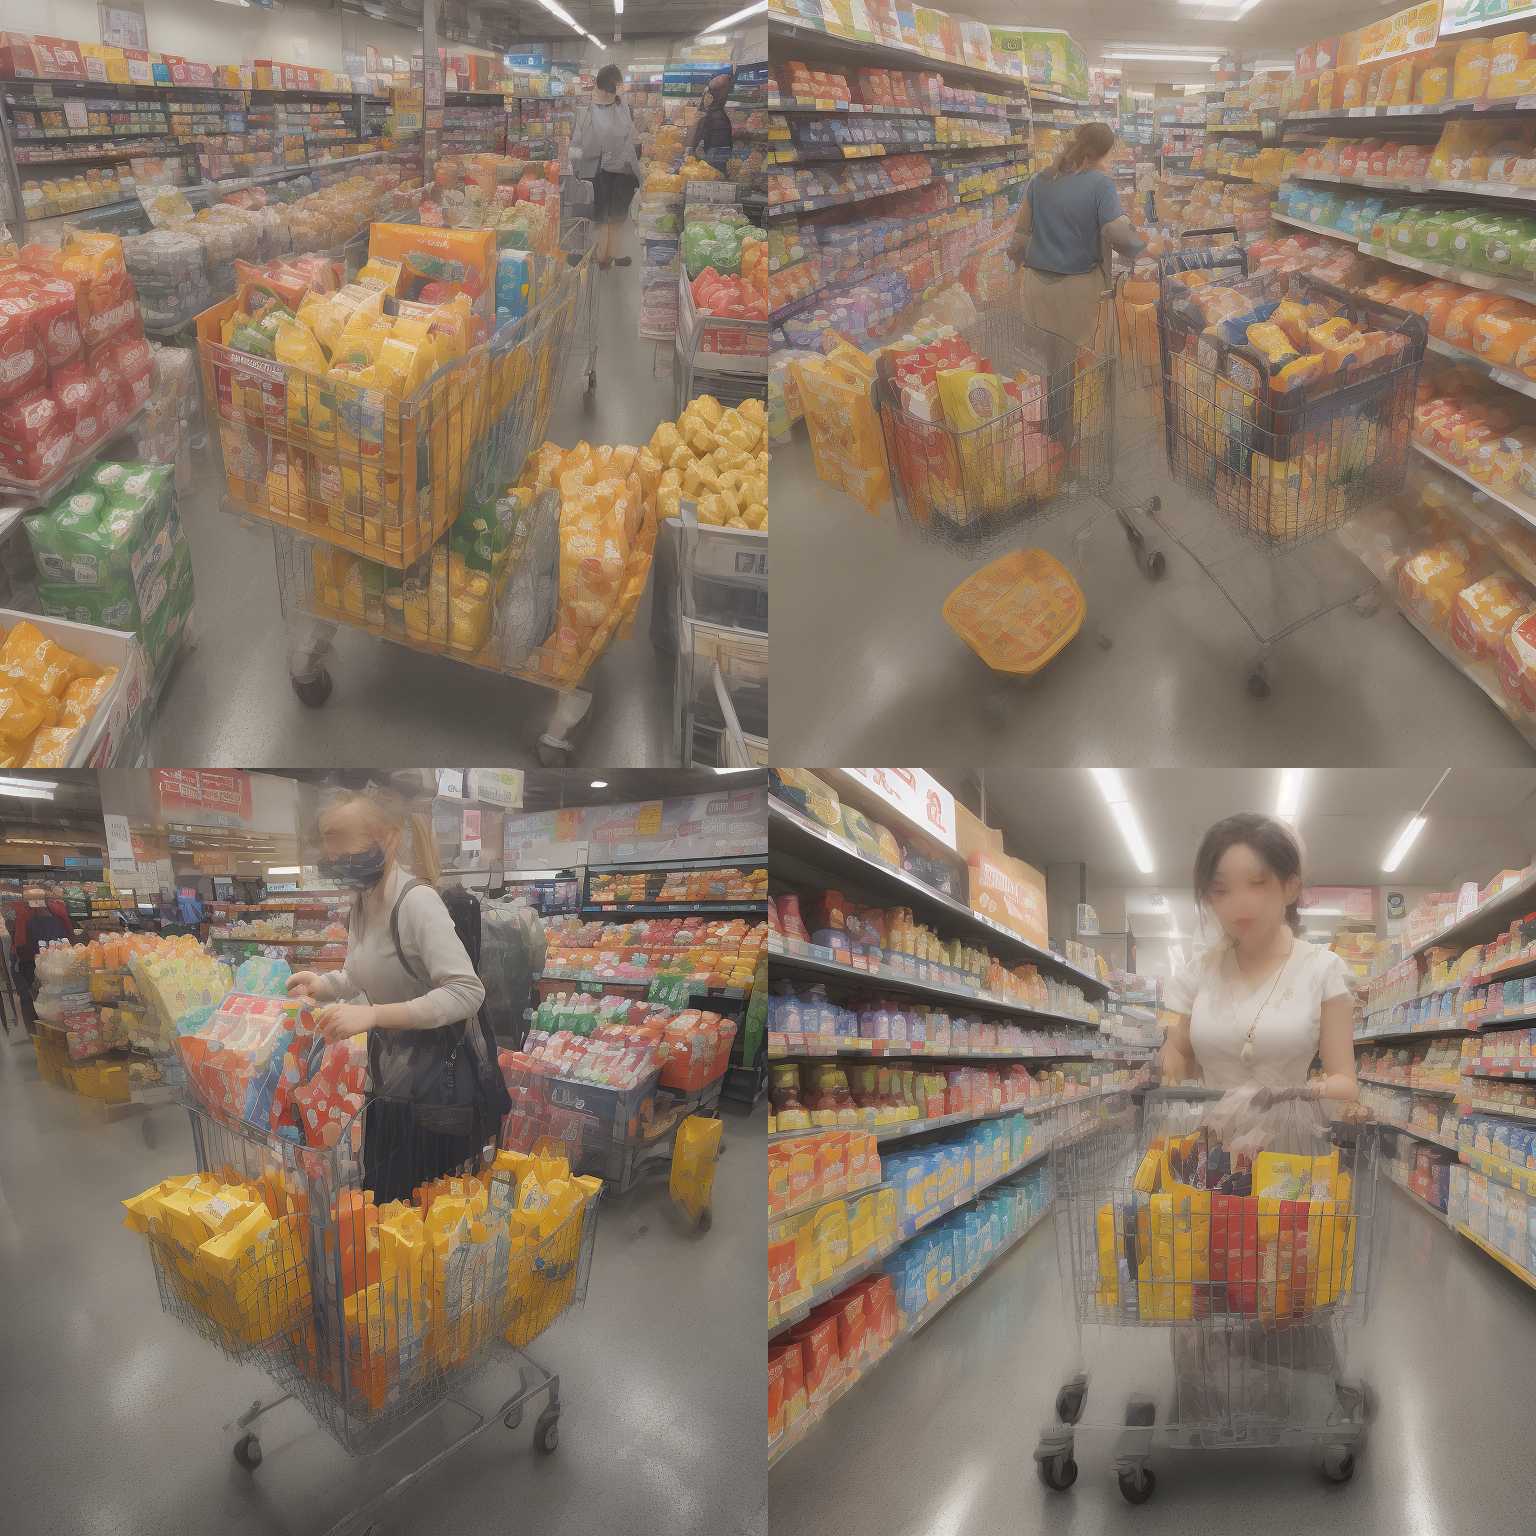 A shopper's cart after she buys a lot of goods